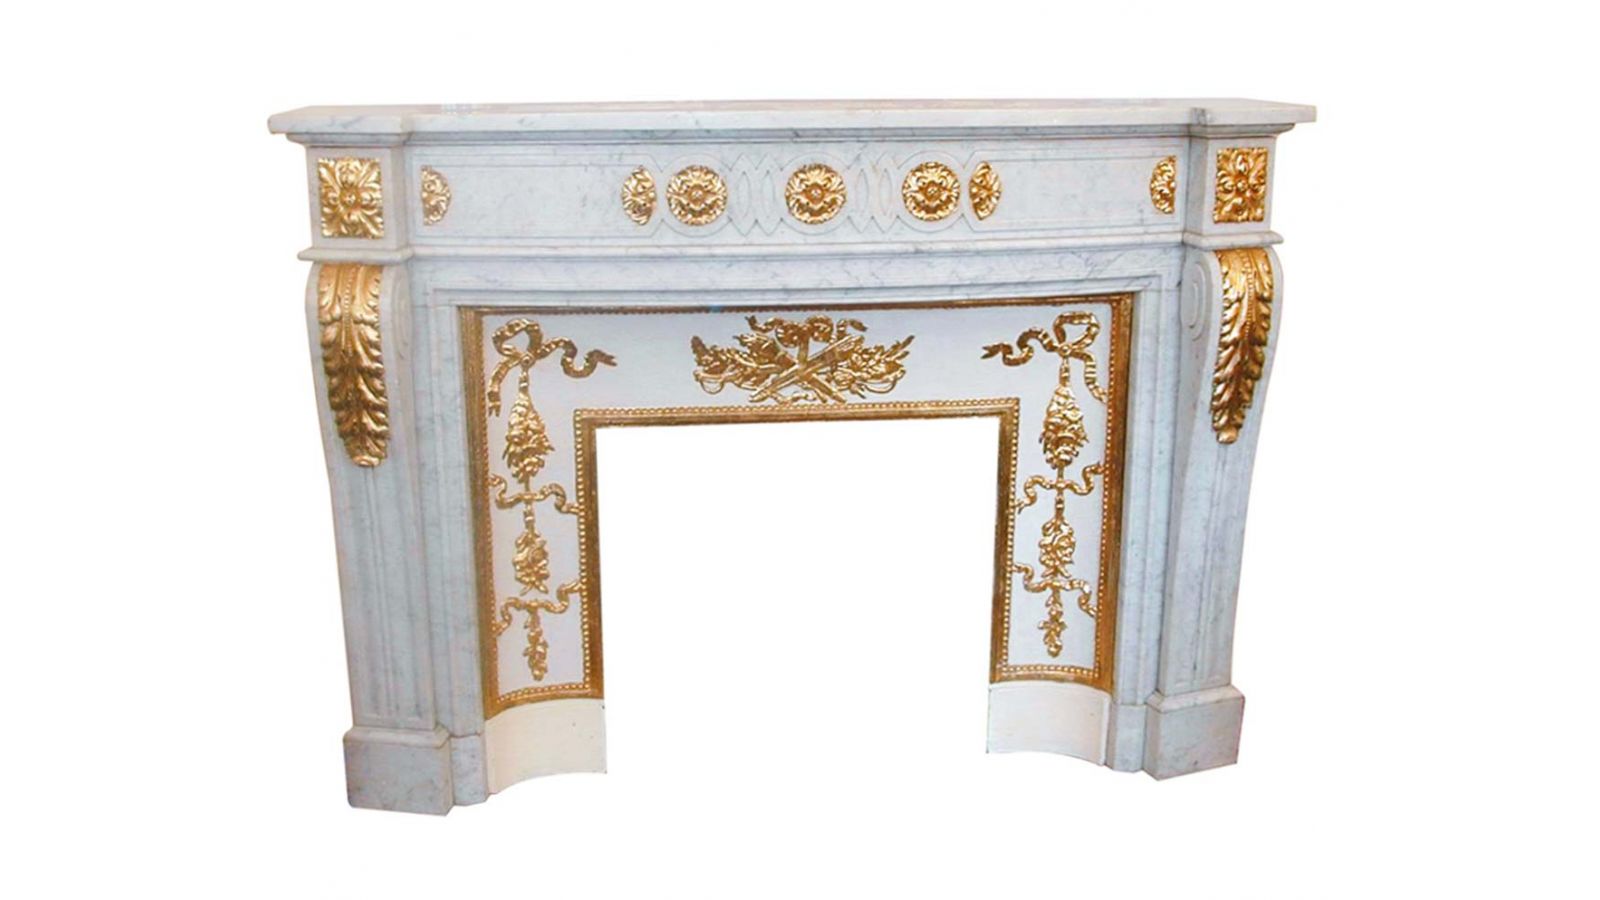 Plaza Hotel Carved Carrera Marble Mantel with Gold Details